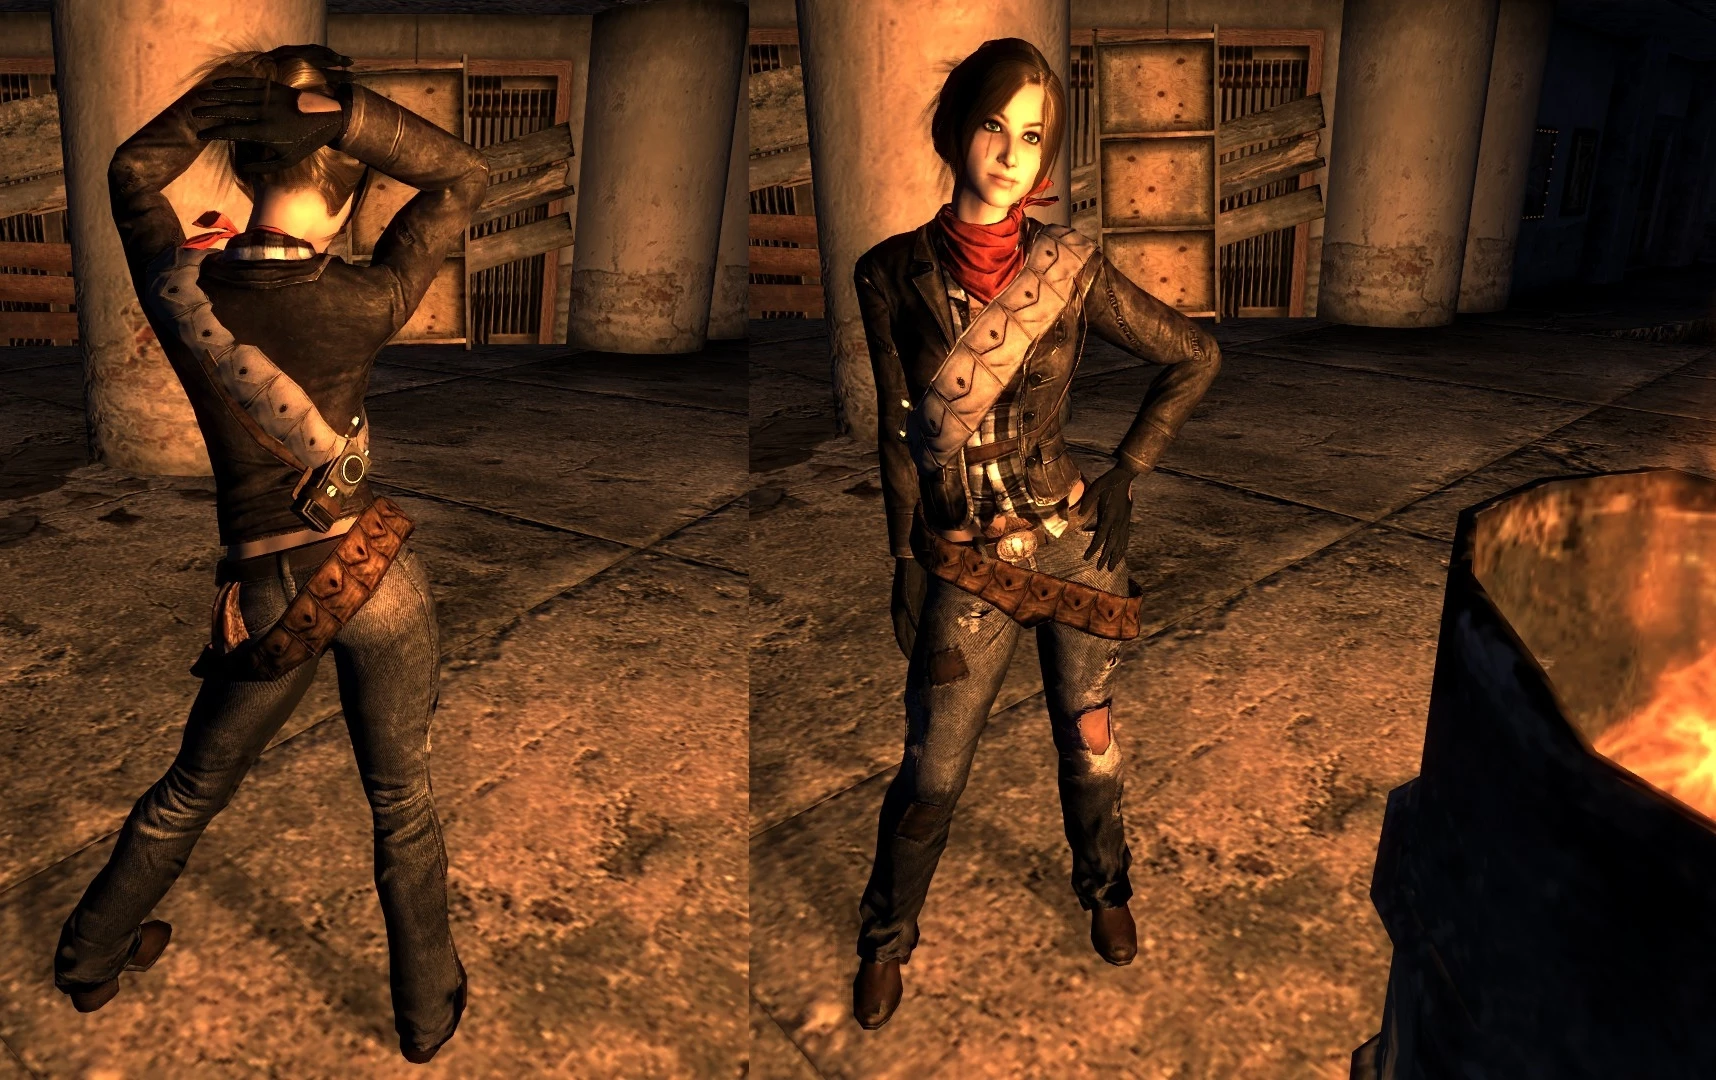 Cass Freelancer Outfit at Fallout New Vegas mods and community. 